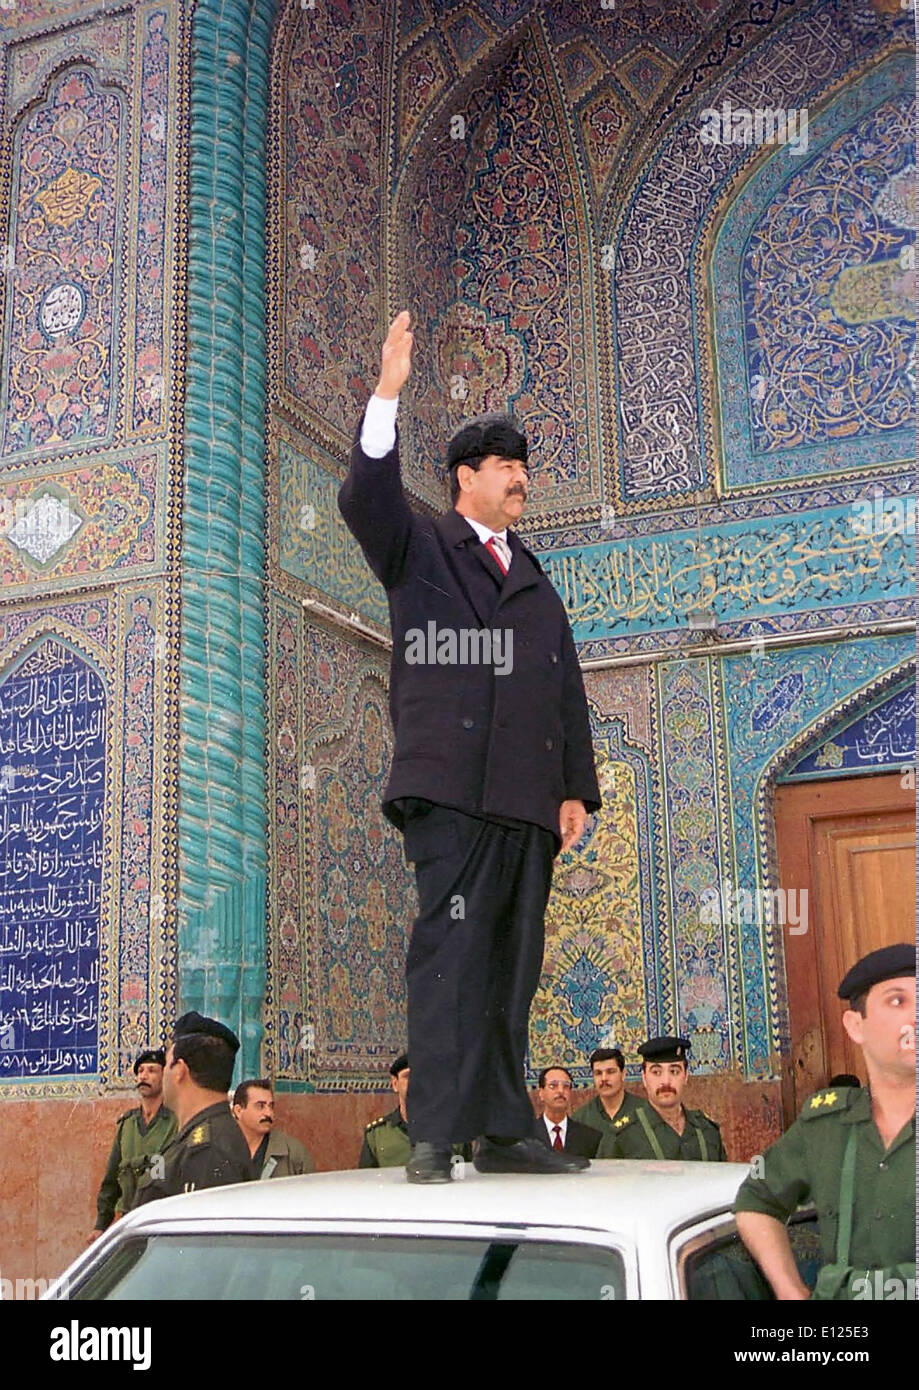 Iraqi Dictator Saddam Hussein stands on car in front of Holy Shrine Imam Ali, Najaf, Mar. 25, 1998 Stock Photo